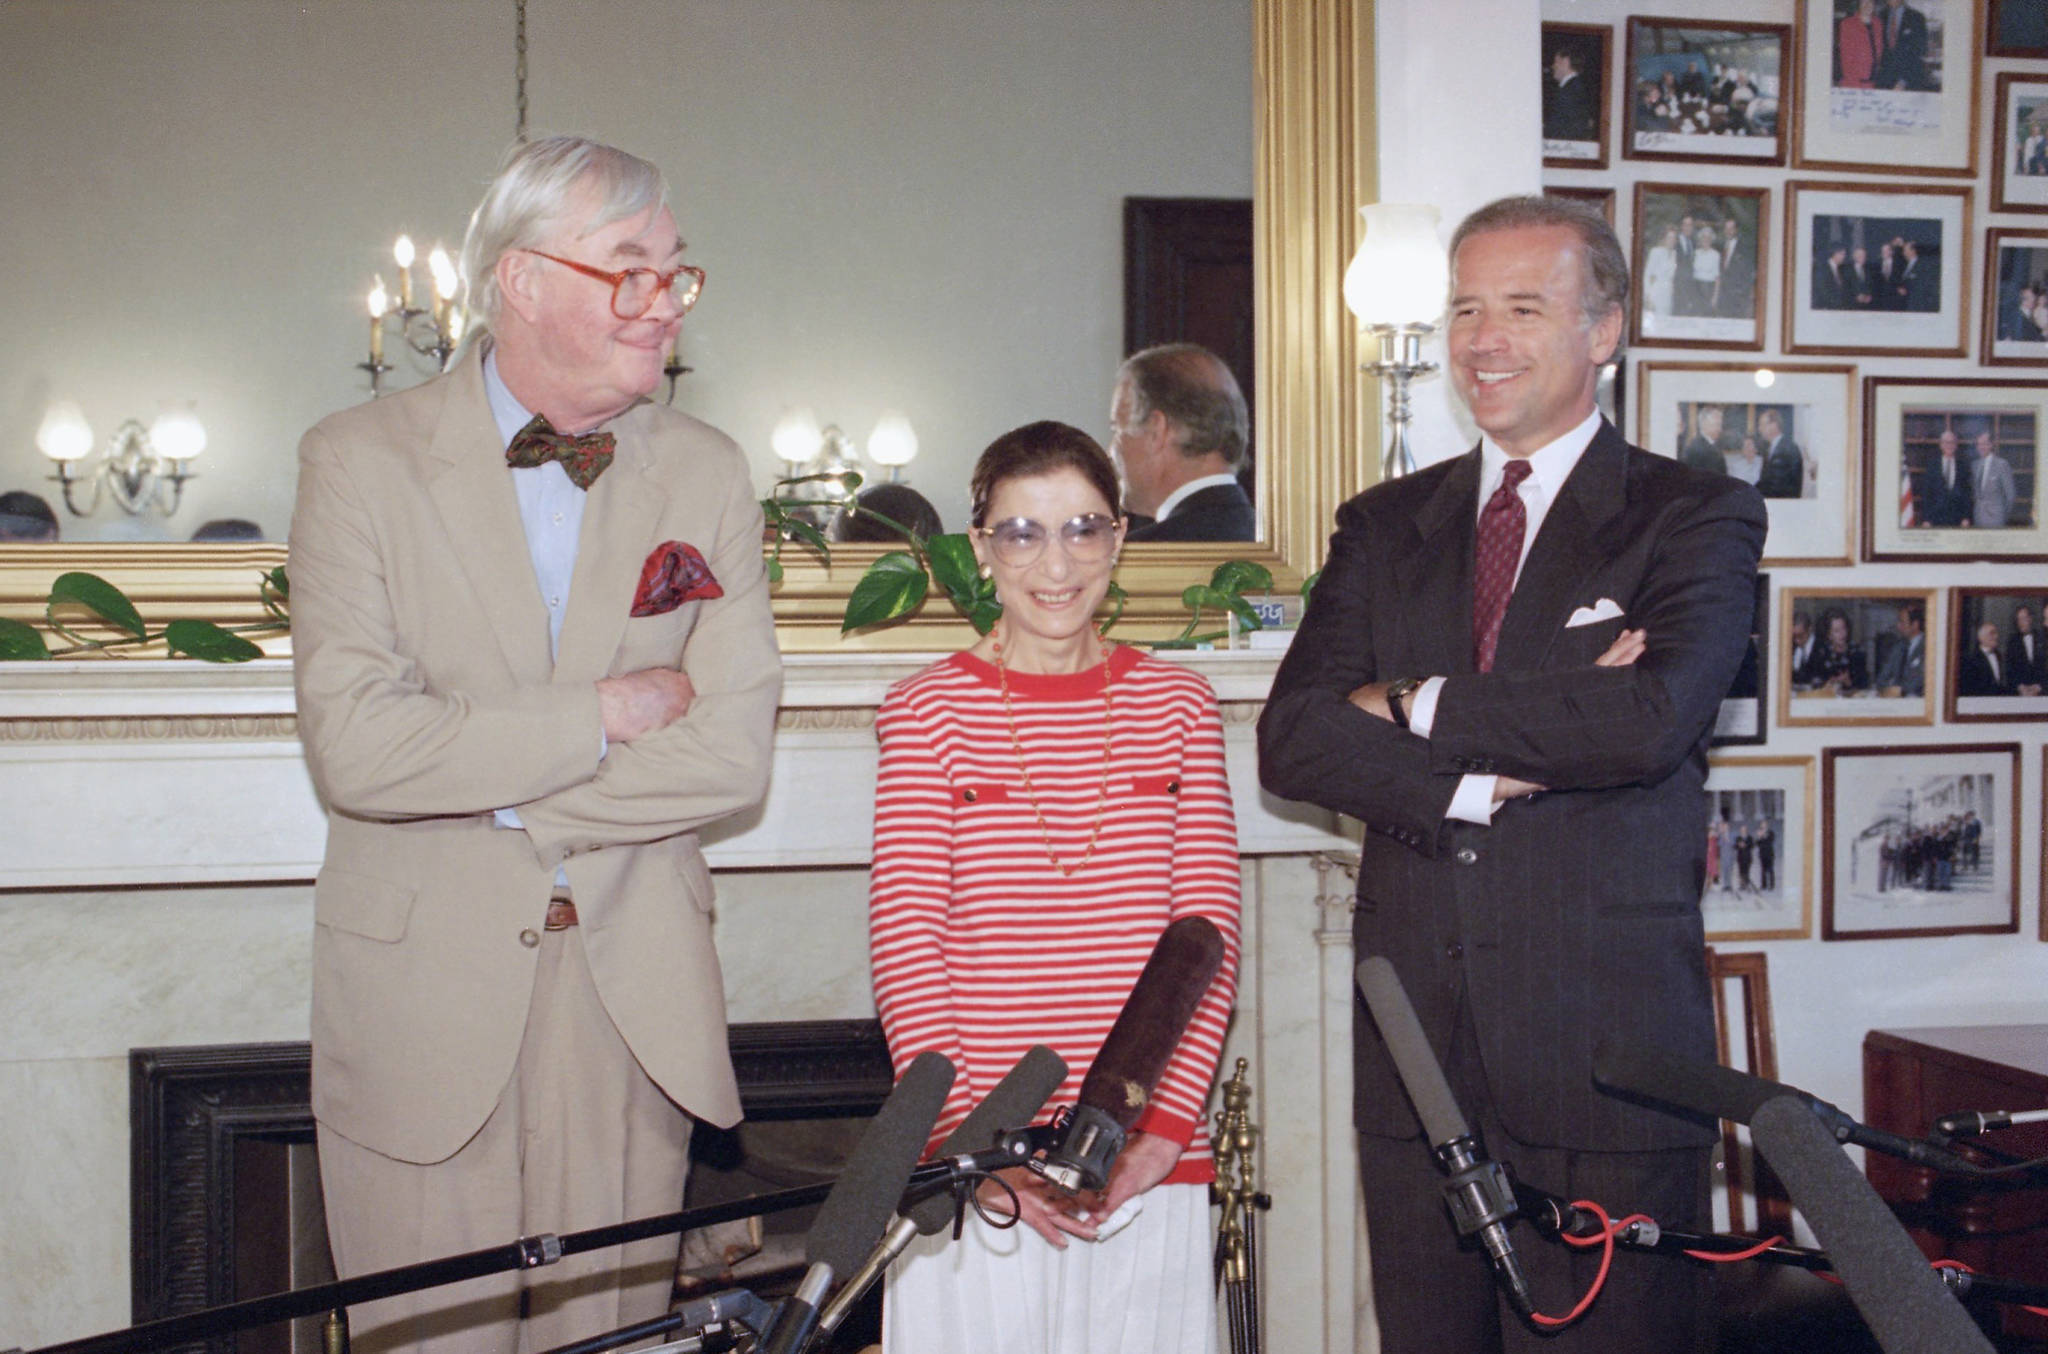 In this June 15, 1993, file photo, Judge Ruth Bader Ginsburg poses with Sen. Daniel Patrick Moynihan, D-N.Y., left, and Sen. Joseph Biden, D-Del., chairman of the Senate Judiciary Committee on Capitol Hill in Washington. The Supreme Court says Ginsburg has died of metastatic pancreatic cancer at age 87. (Marcy Nighswander/Associated Press file)